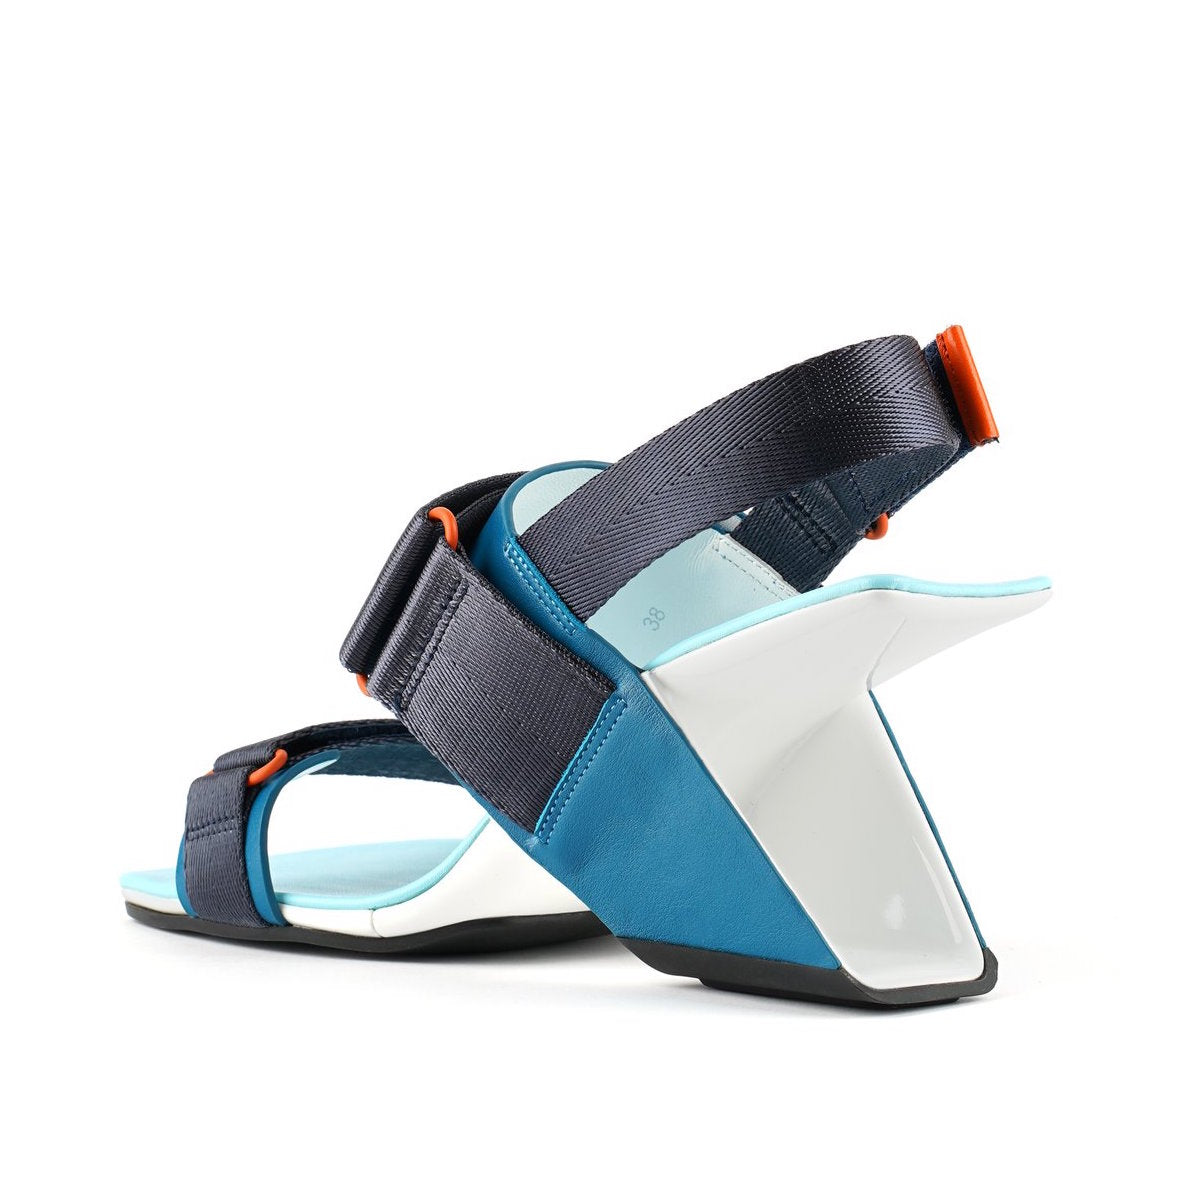 Inner back view of the united nude loop run high heel sandal. This sandal is blue with a black back strap, a black strap over the instep, and a black strap over the toes.